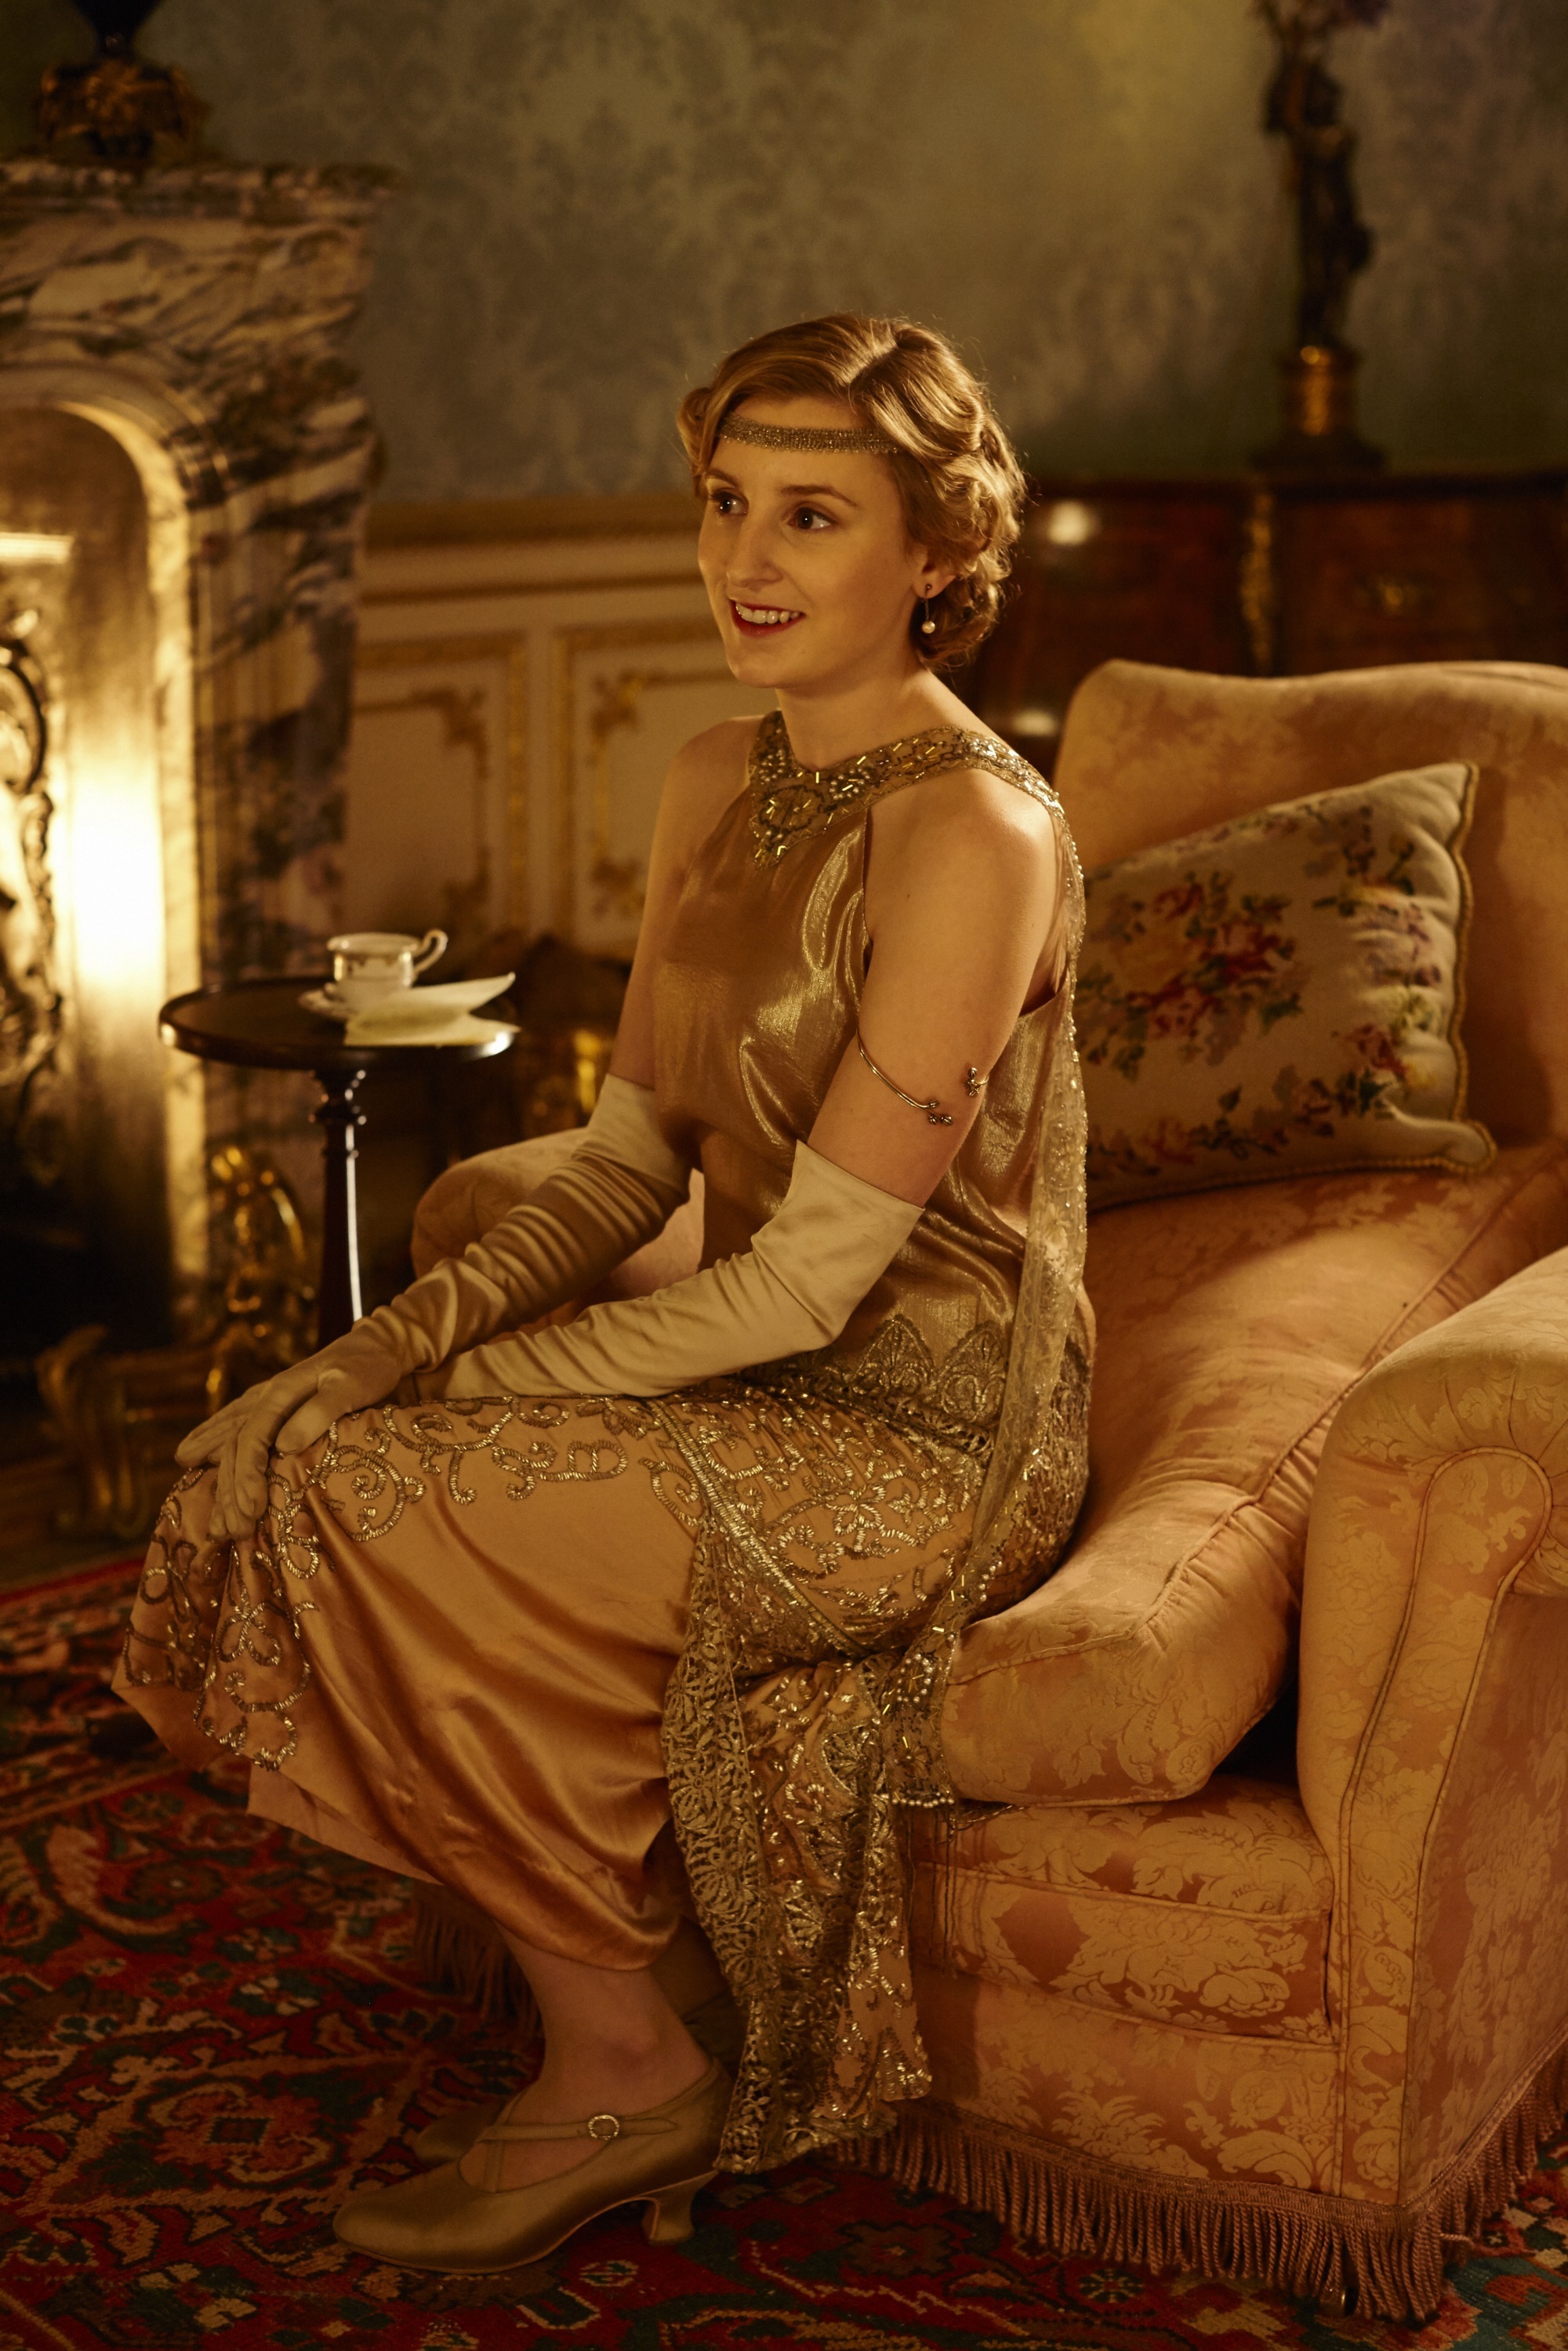 <p><span>When the "Downton Abbey" TV series wrapped with season 6, which was set in 1925, Laura Carmichael -- seen here as Lady Edith in a glamorous and intricately beaded peachy-gold dress with an attached cape that year -- said she would miss her costumes. "The clothes have been wonderful and having things made and designed with you in mind and for the storylines and for these occasions [has been] really, really special," she told Front Row Features.</span></p>